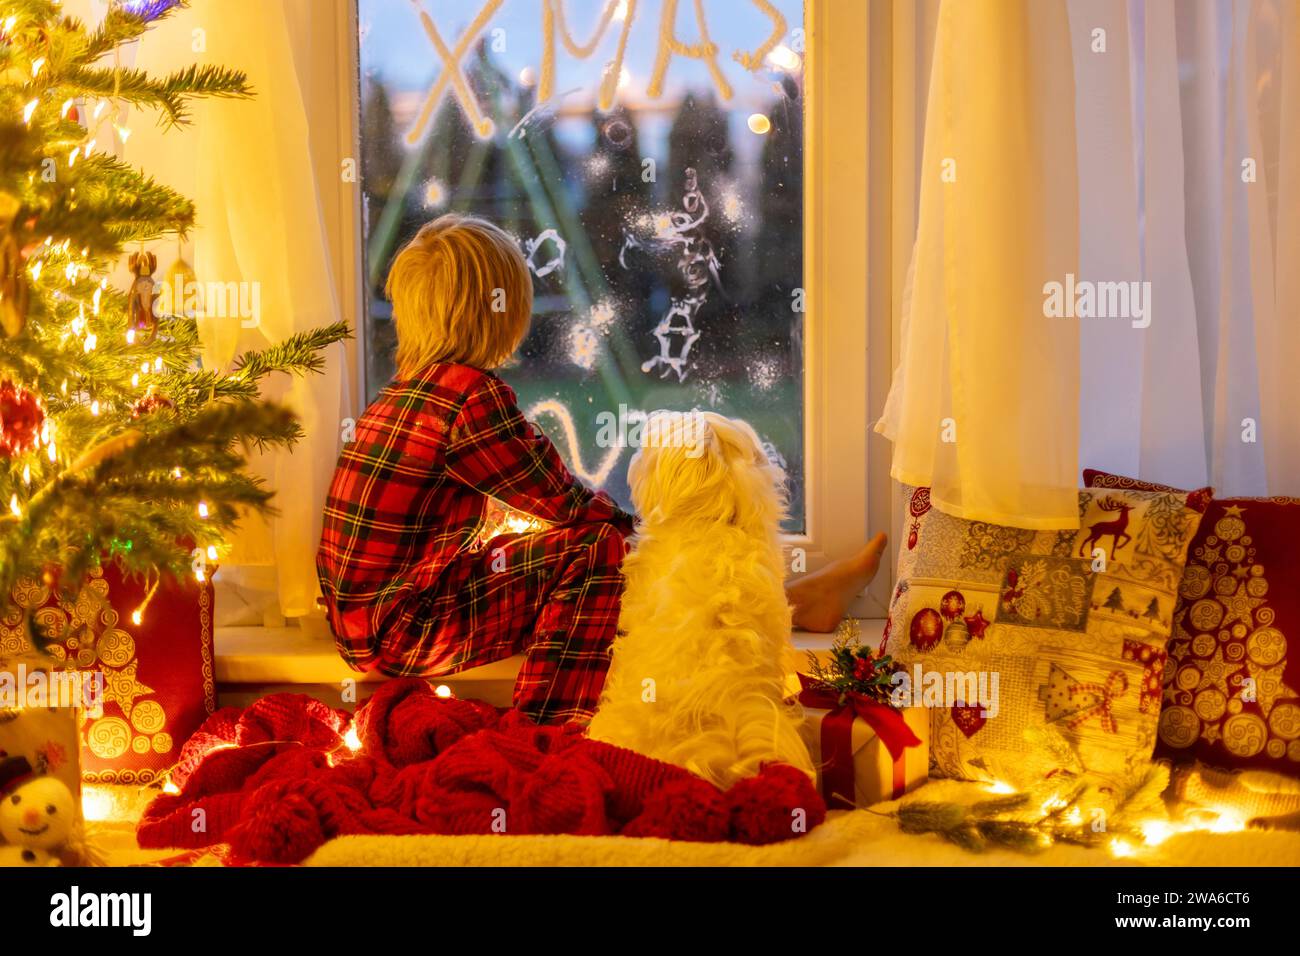 Cute child, sitting on a window, looking outdoors for Santa Claus, eating cookies Stock Photo